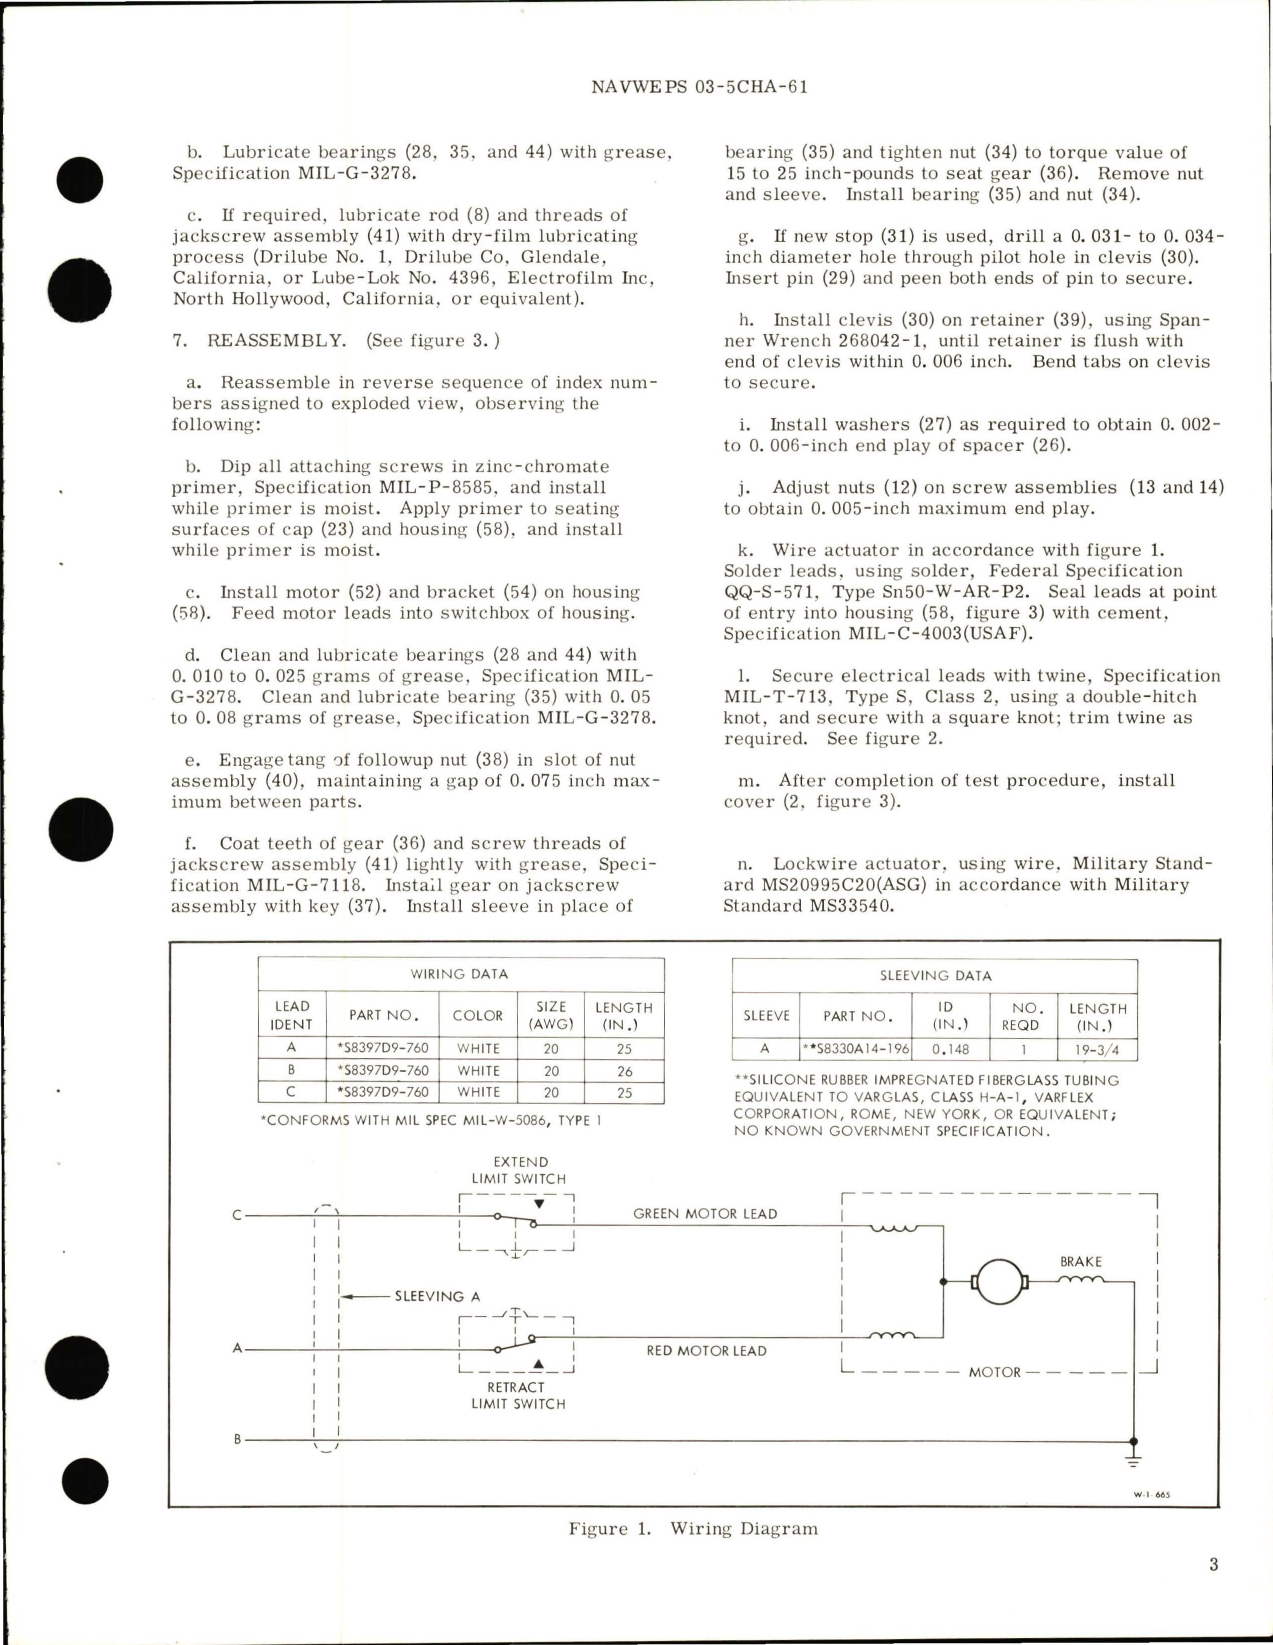 Sample page 5 from AirCorps Library document: Overhaul Instructions with Parts Breakdown for Electromechanical Linear Actuator - Part 525858 